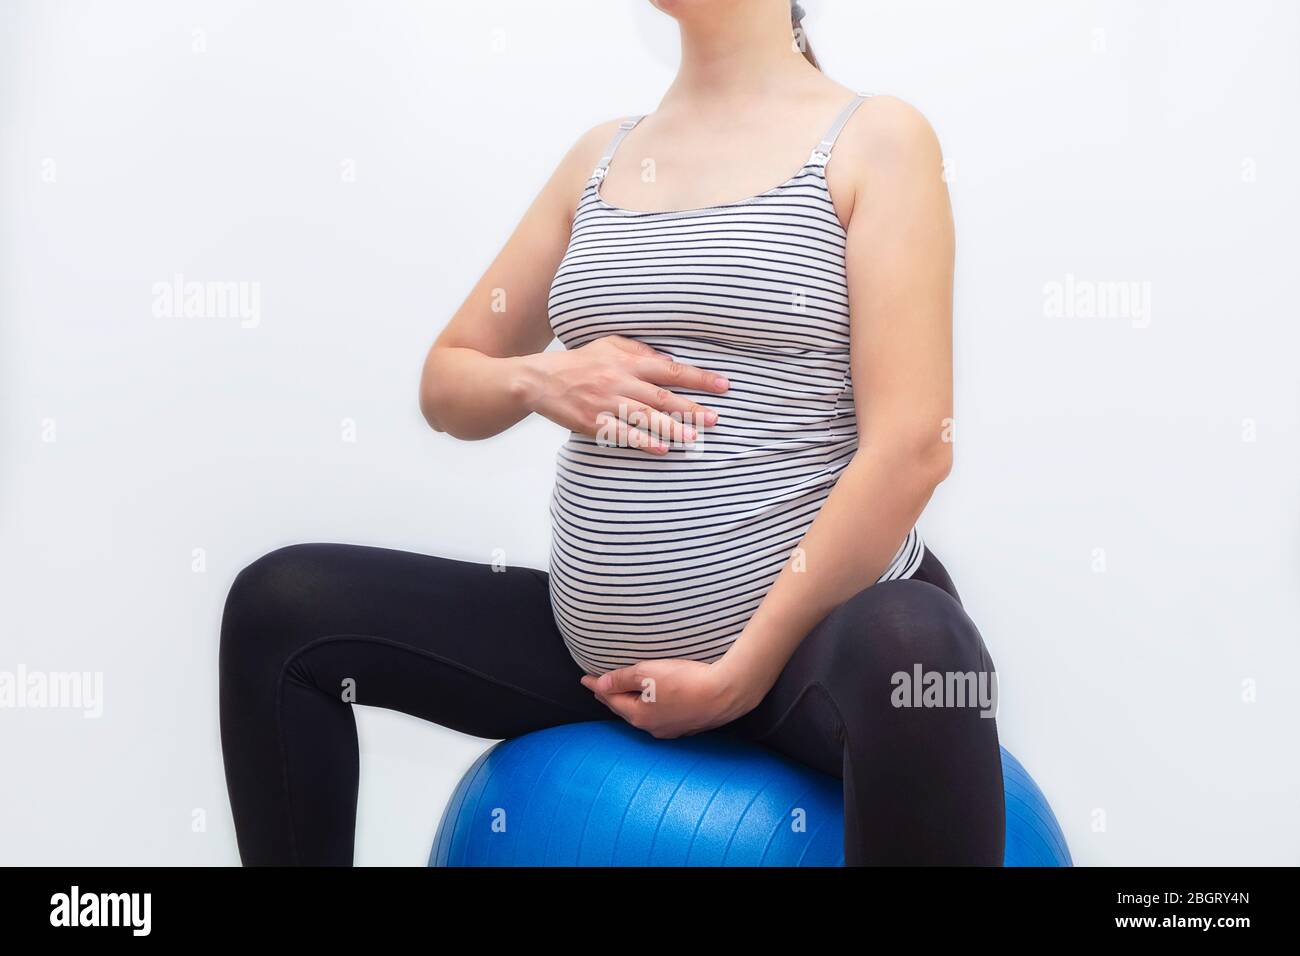 Prenatal (pregnancy) exercises with fitball. Pregnant woman training with birthing ball Stock Photo